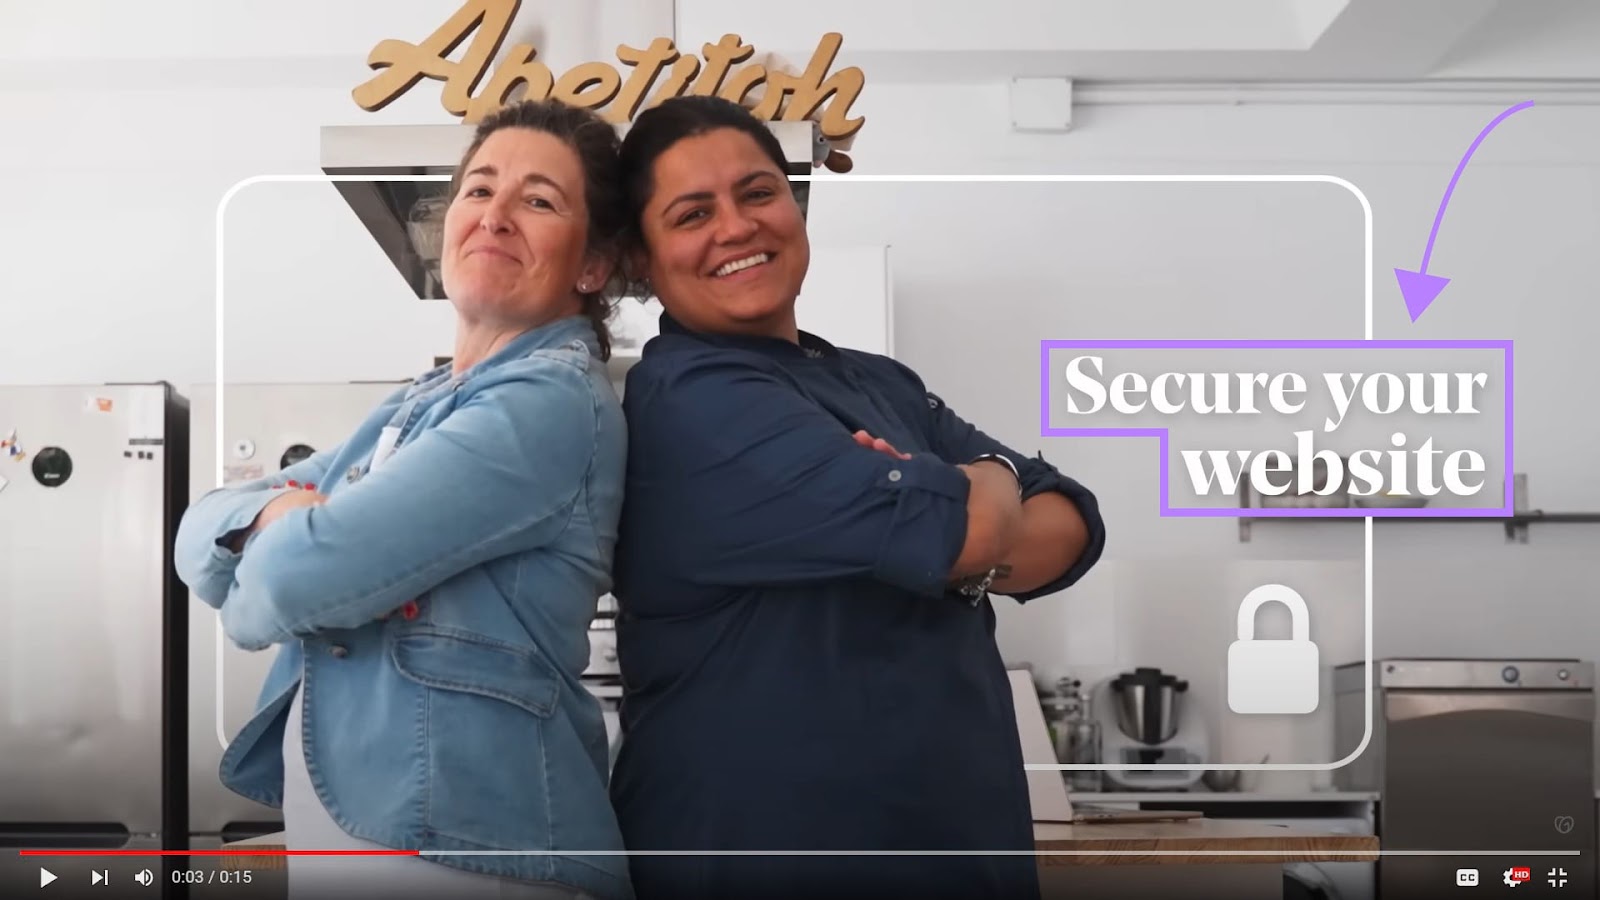 GoDaddy's video ad screenshot with "Secure your website" copy